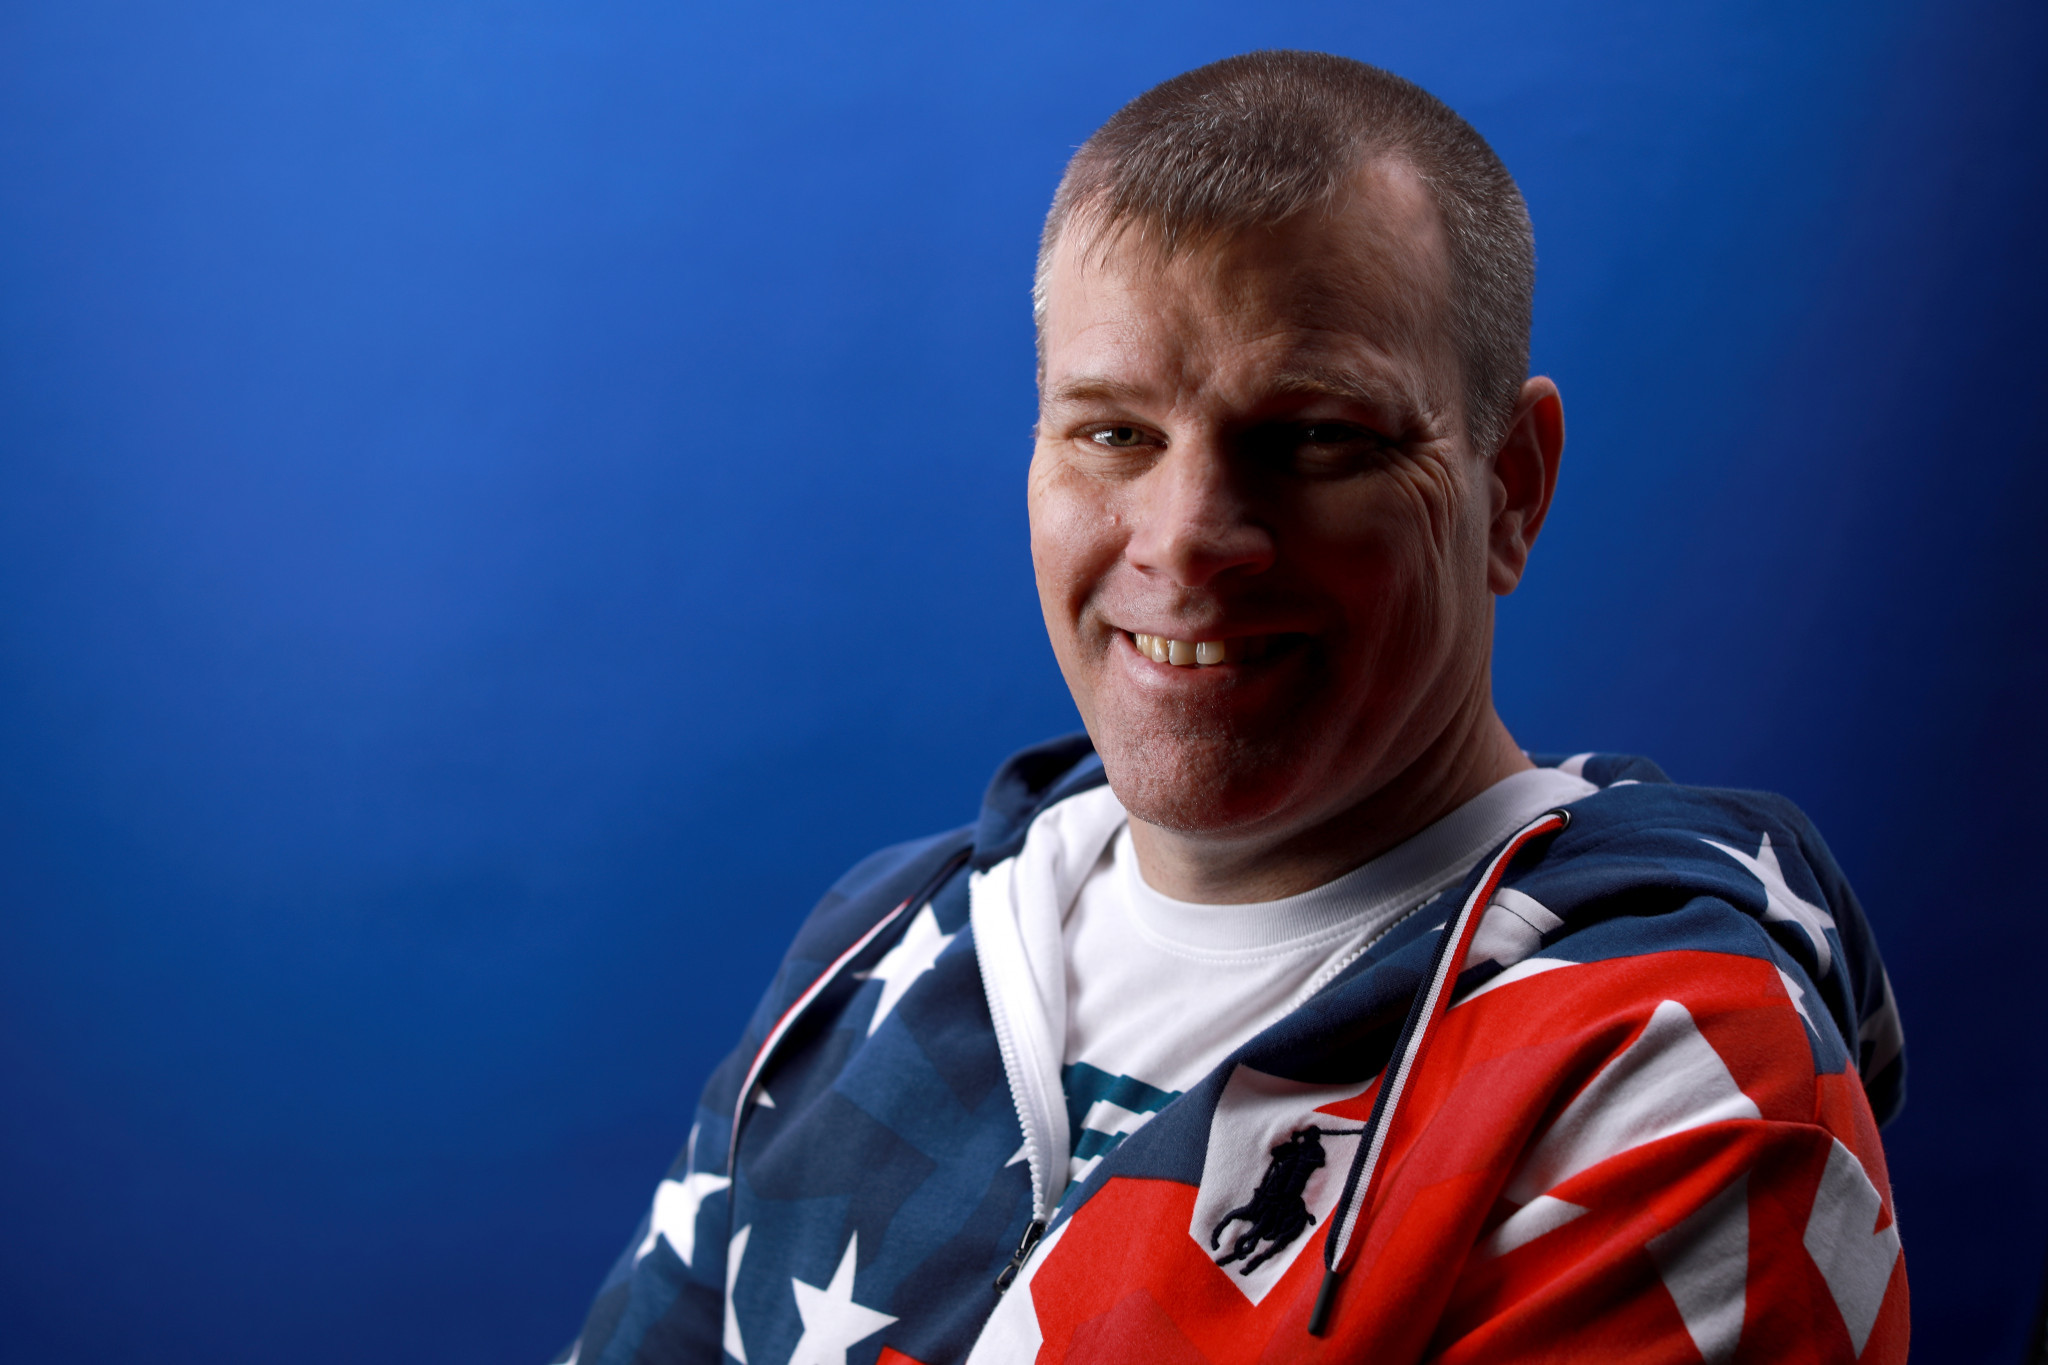 Kirk Black is a member of the US wheelchair curling team for Pyeongchang 2018 ©Getty Images